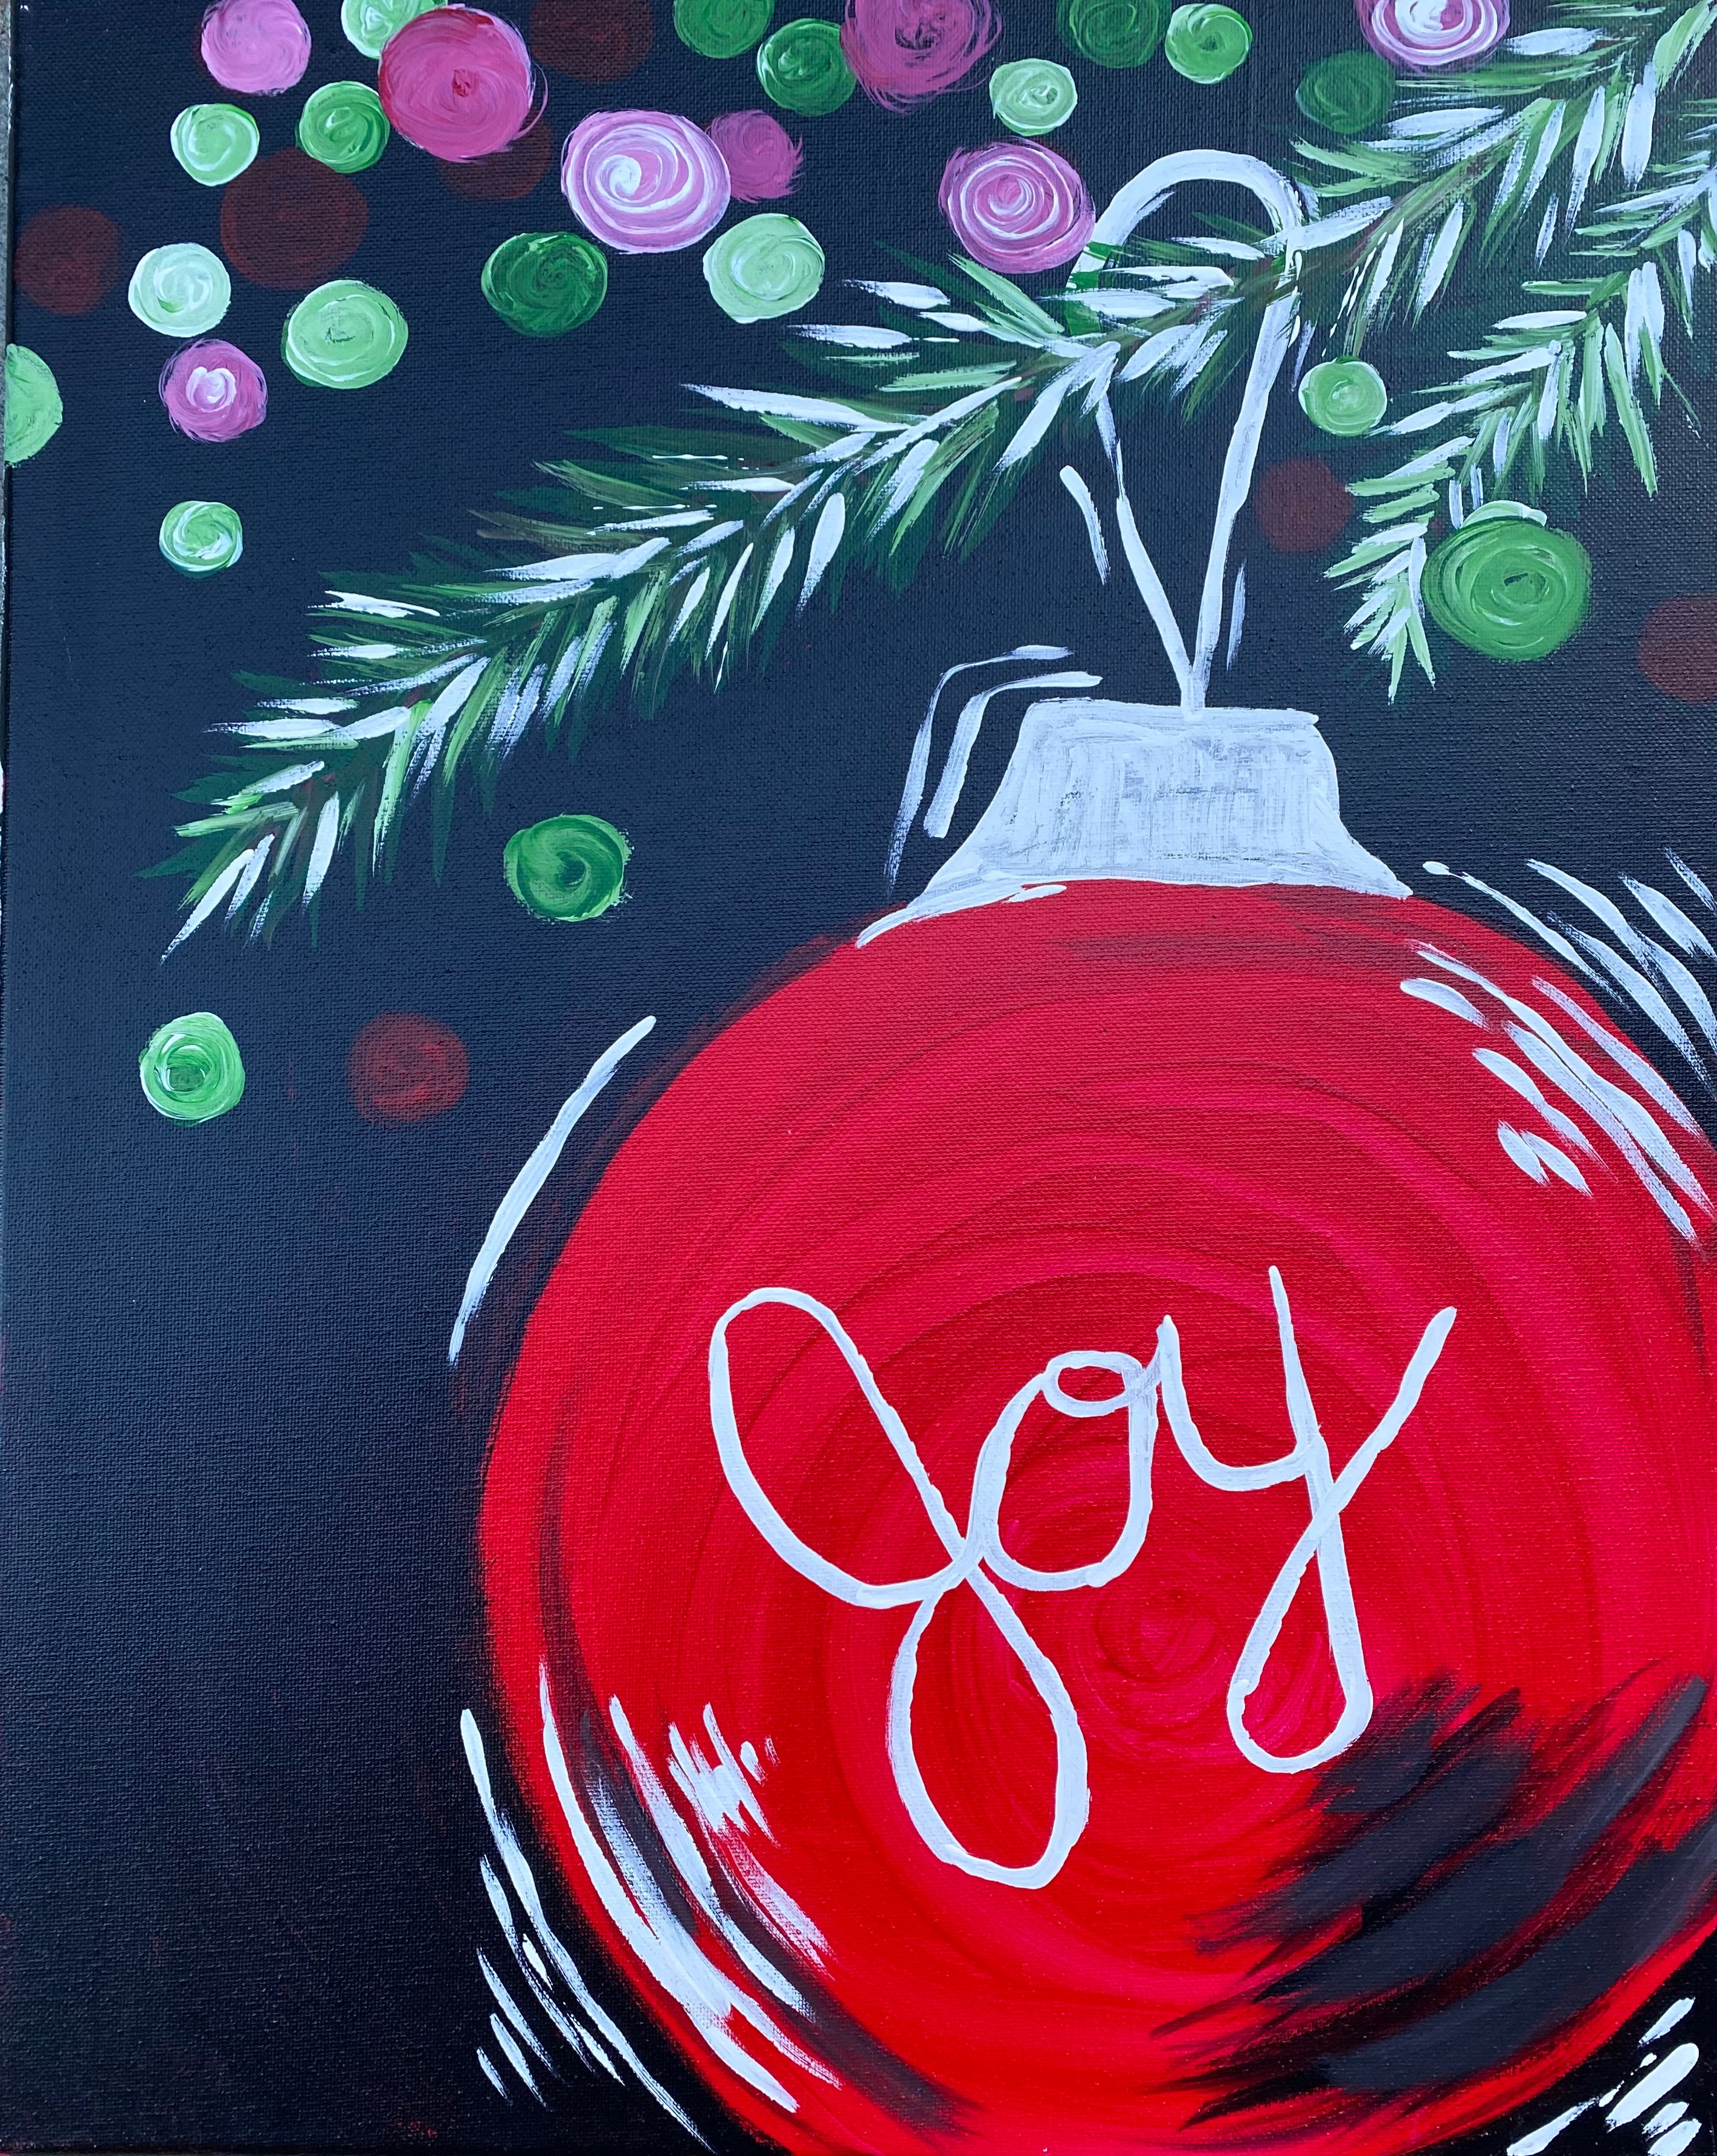 A Christmas Holiday Joy experience project by Yaymaker